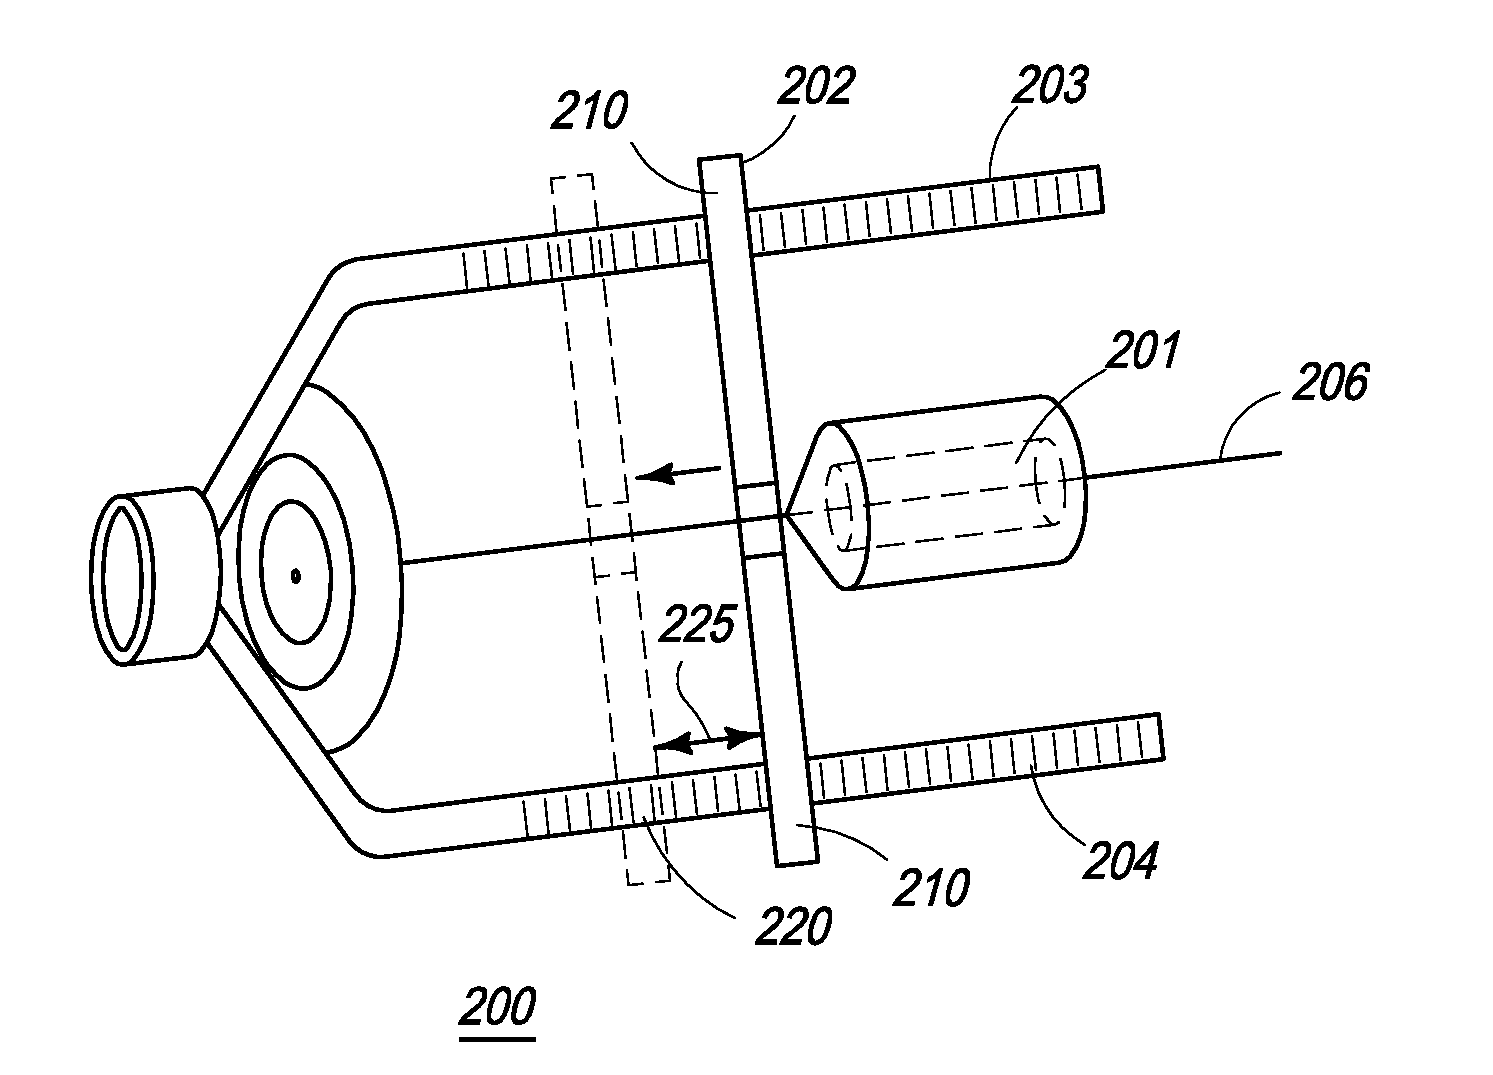 Device for measuring blockage length in a blood vessel